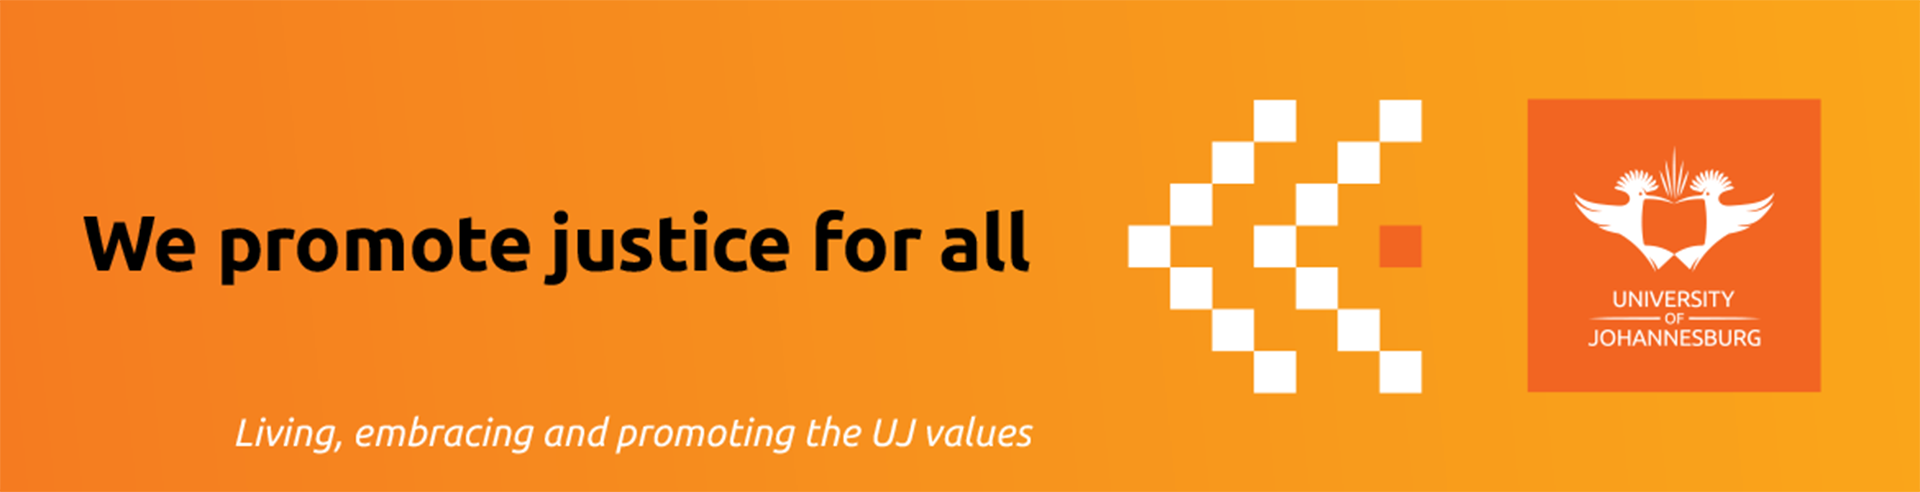 Uj Values Expressions Posters 2020 Ulink 1170x300mm 25